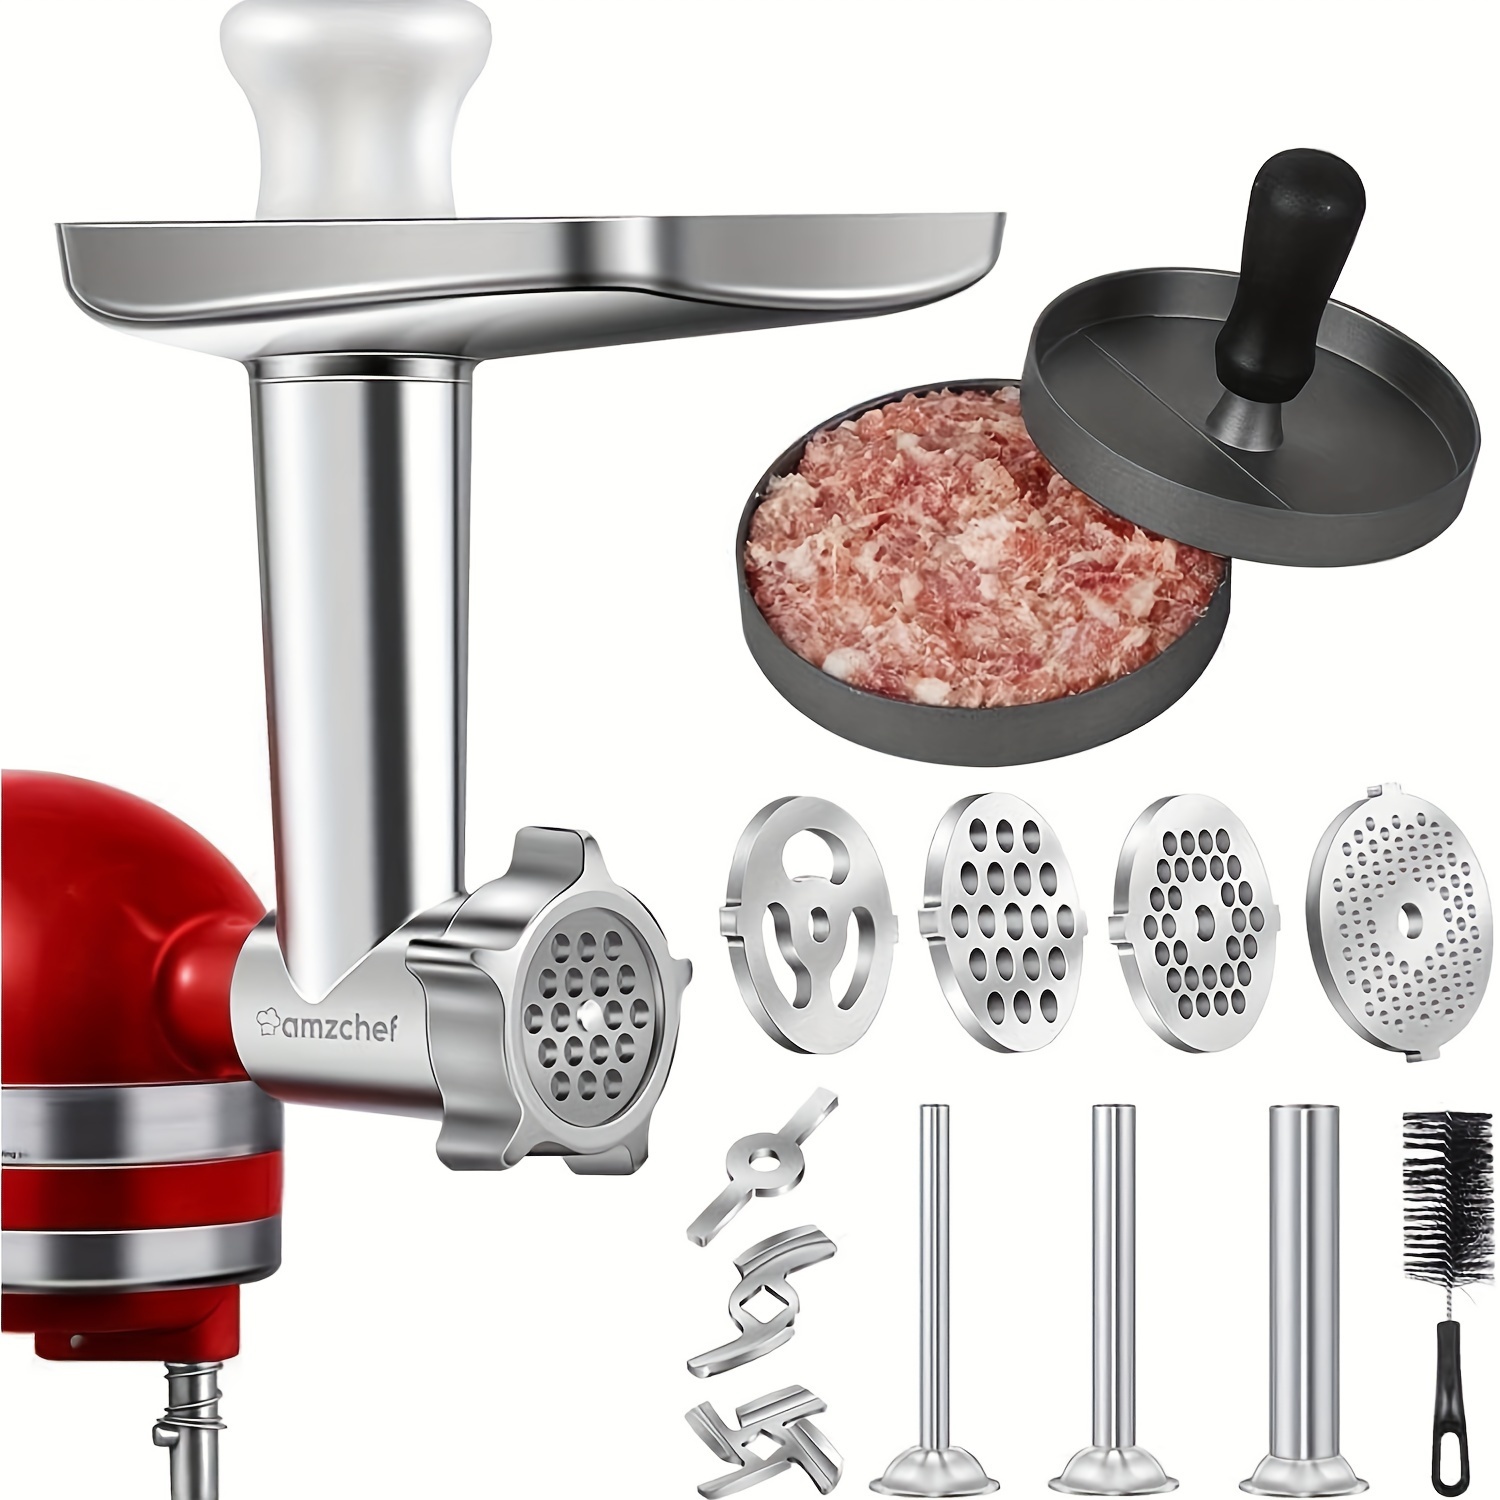 Stainless Steel Meat Grinder attachment for Kitchenaid. Heavy duty